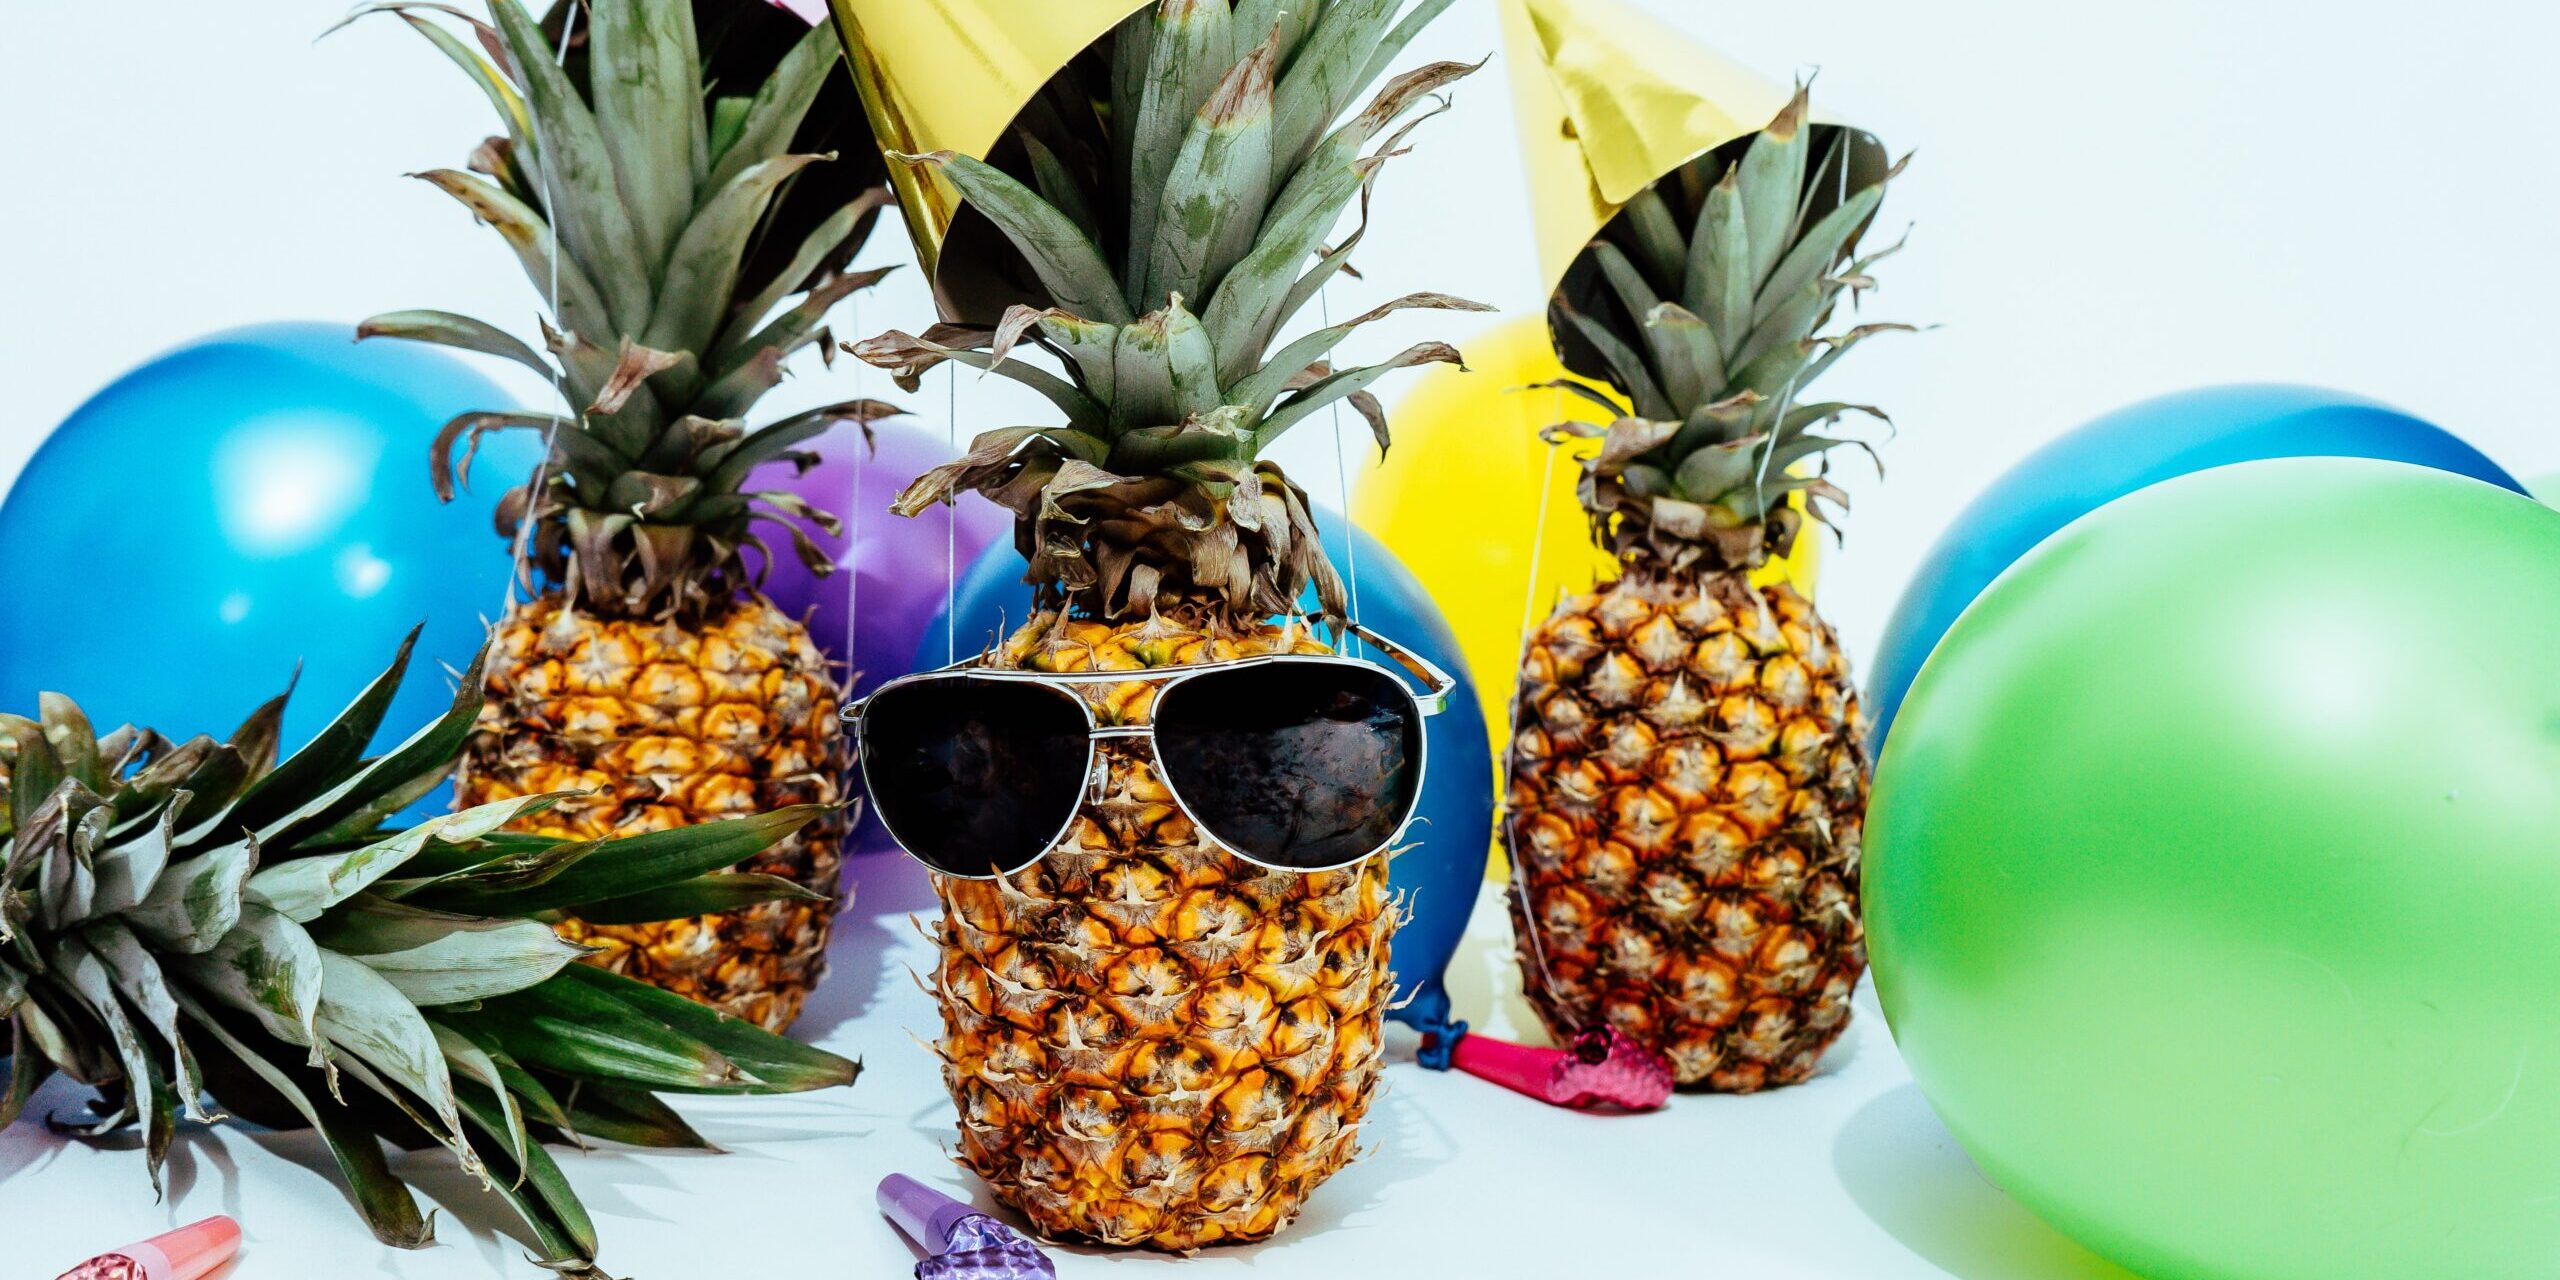 Summer party with pineapple